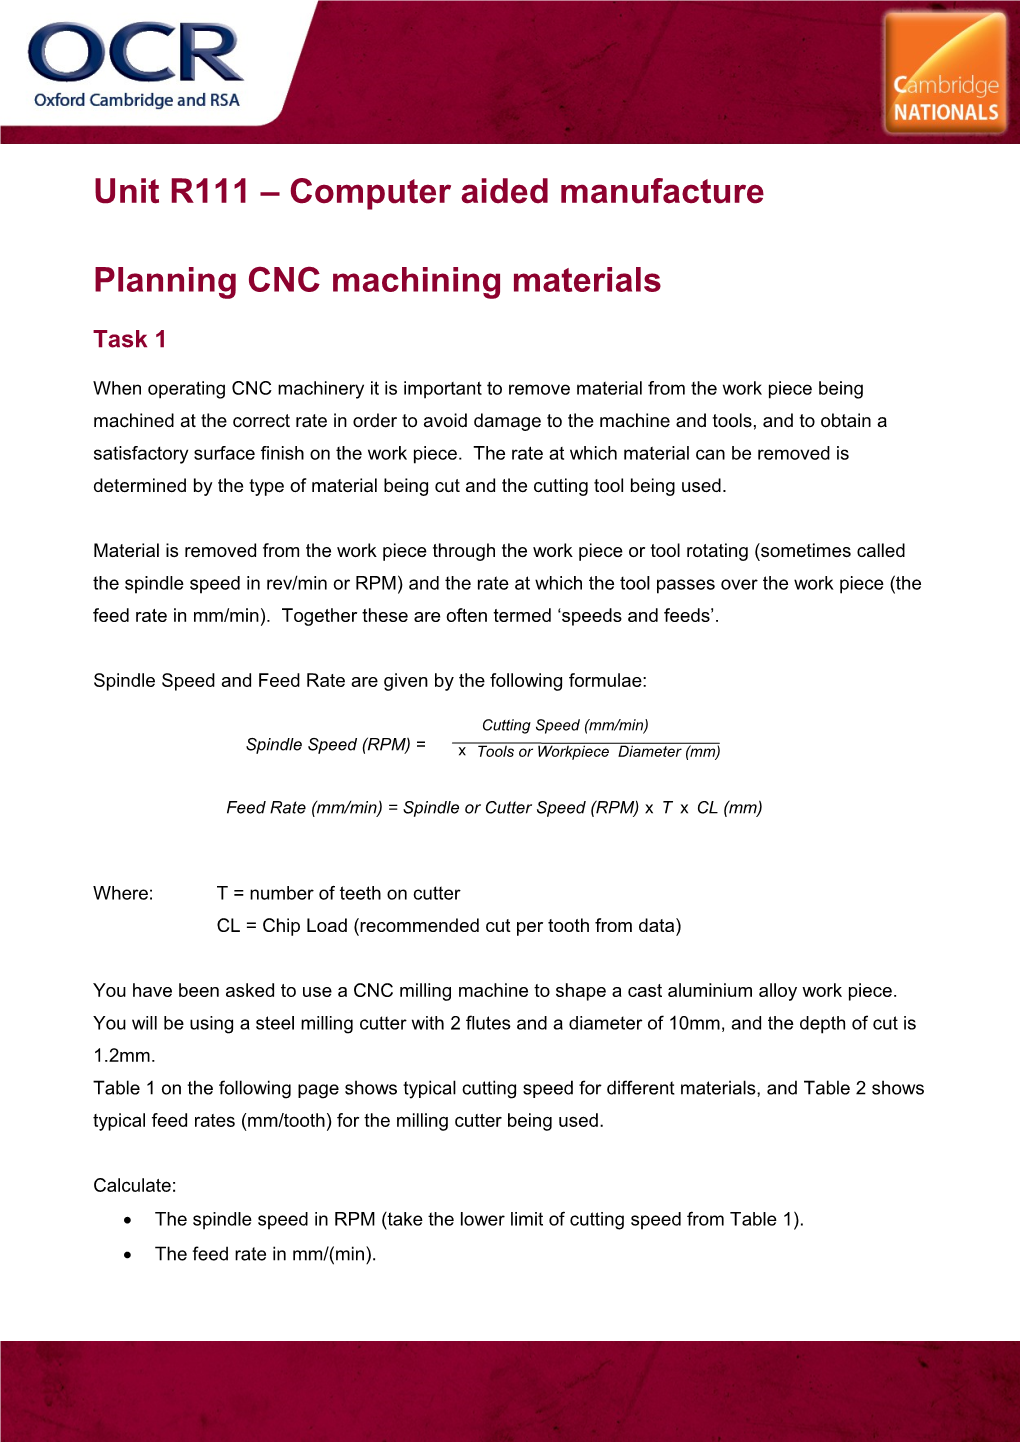 OCR Cambridge Nationals in Engineering - Lesson Element Activity, R111, Planning CNC Machining